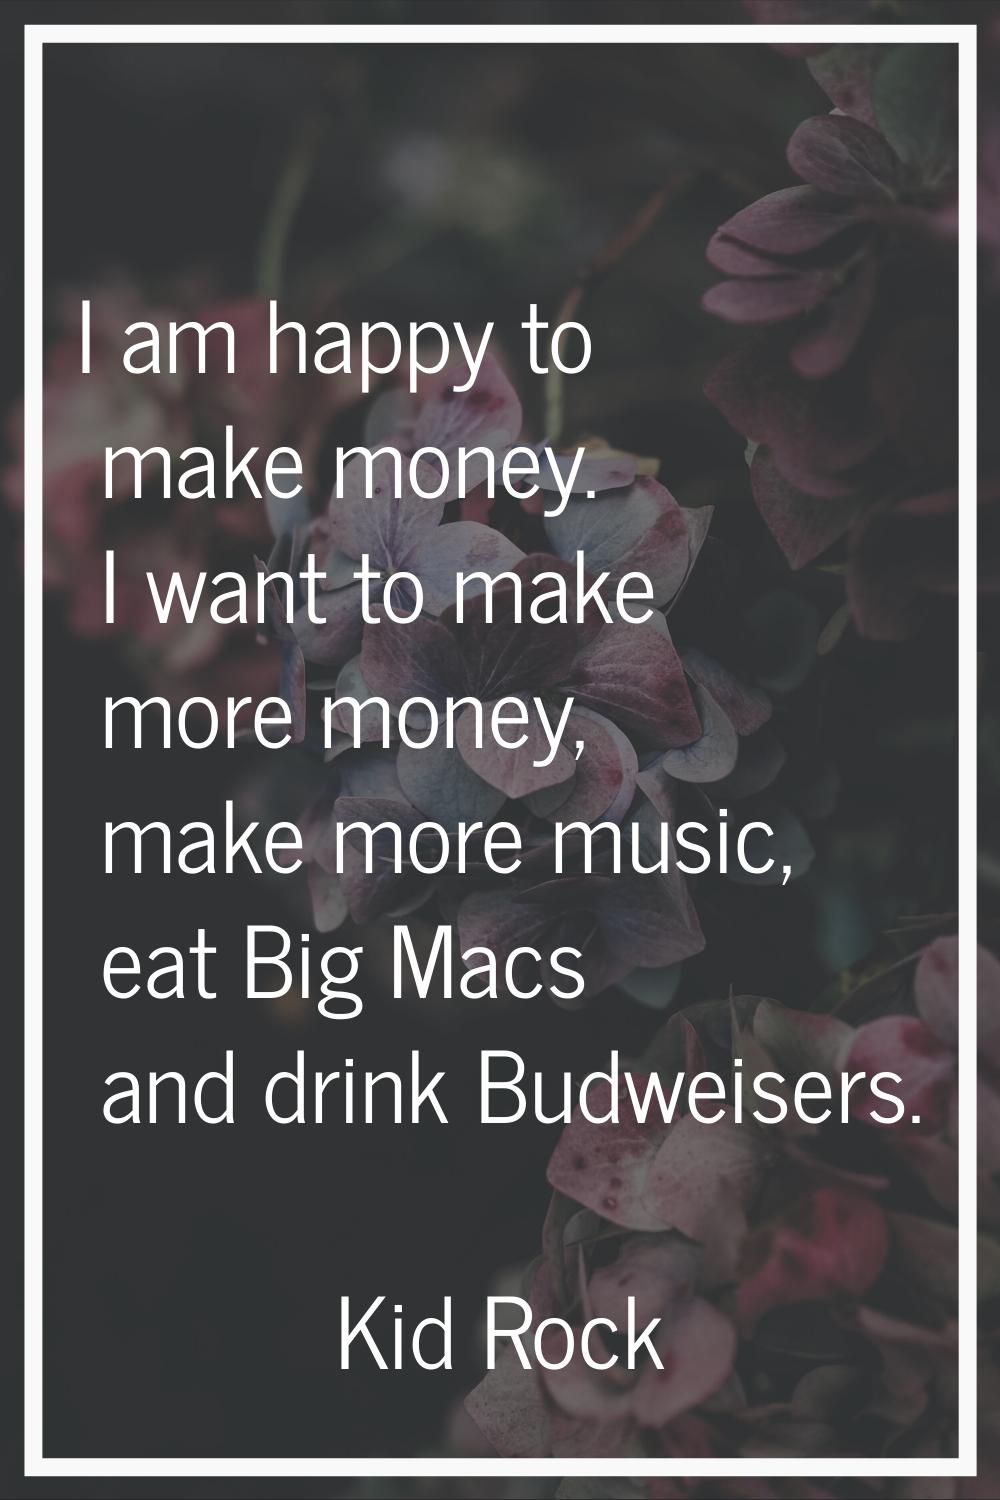 I am happy to make money. I want to make more money, make more music, eat Big Macs and drink Budwei